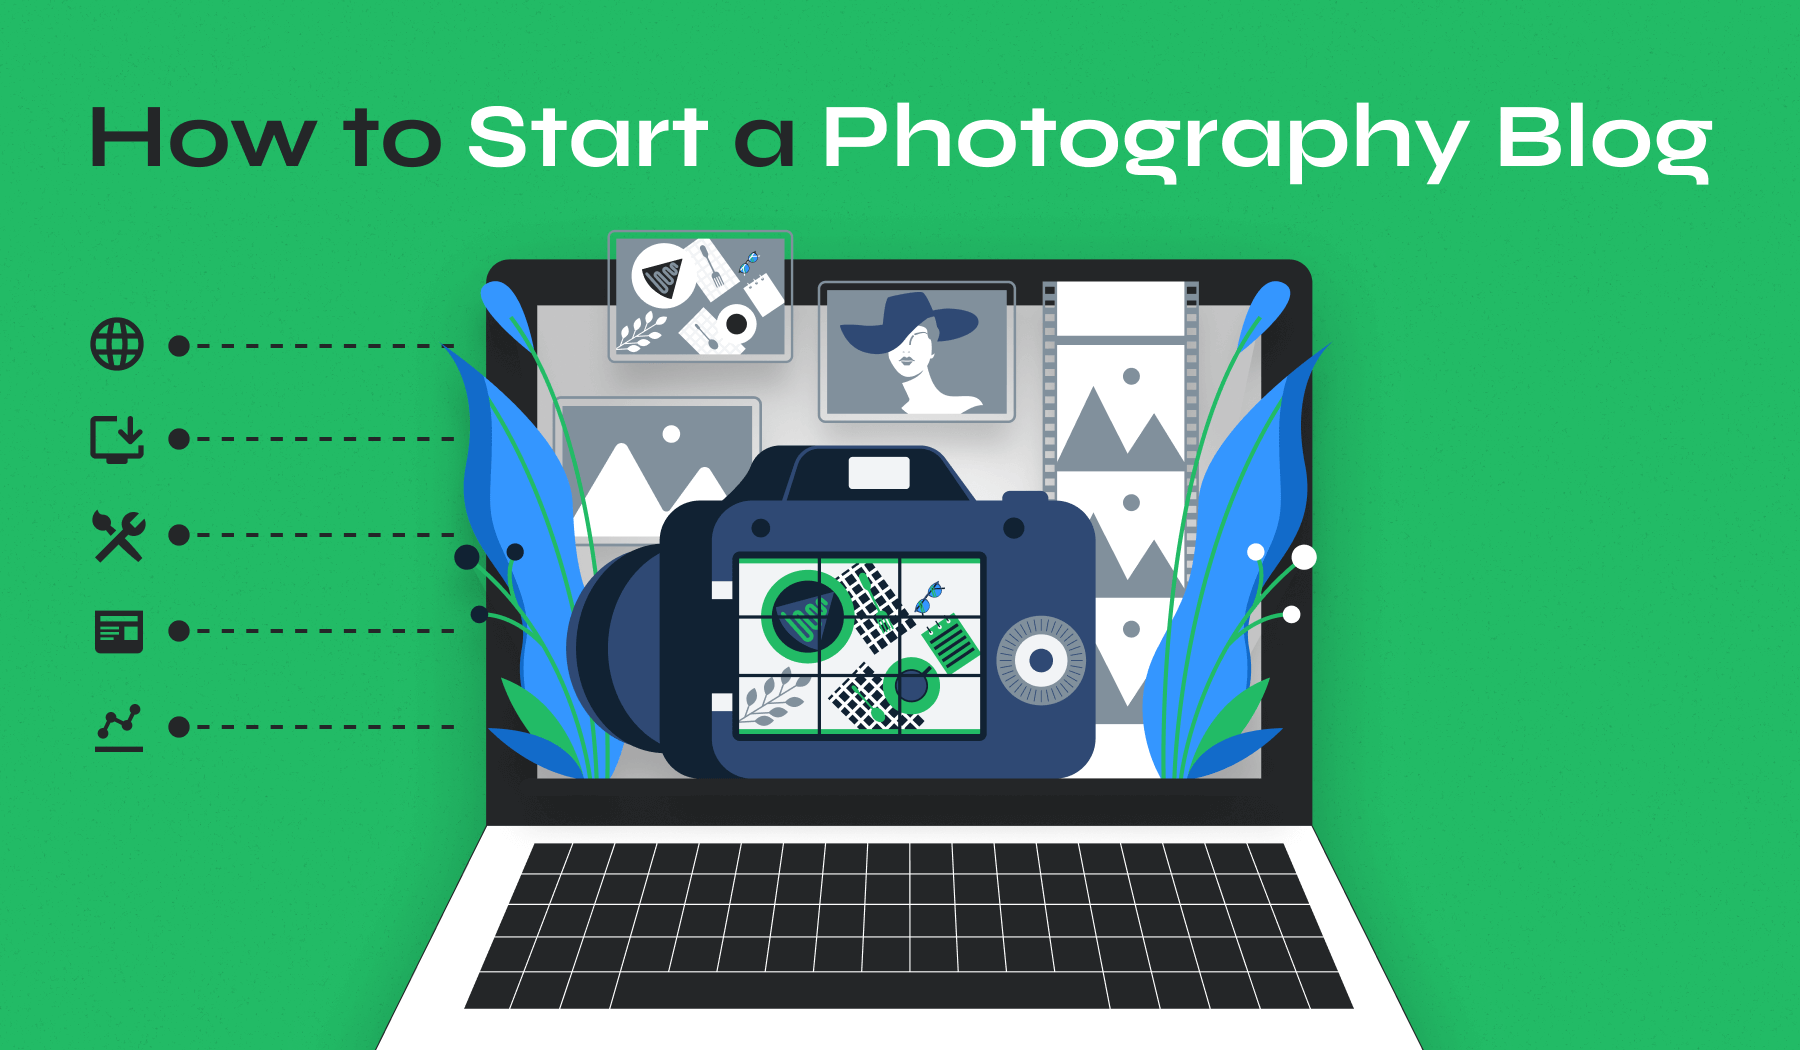 How to Start a Photography Blog